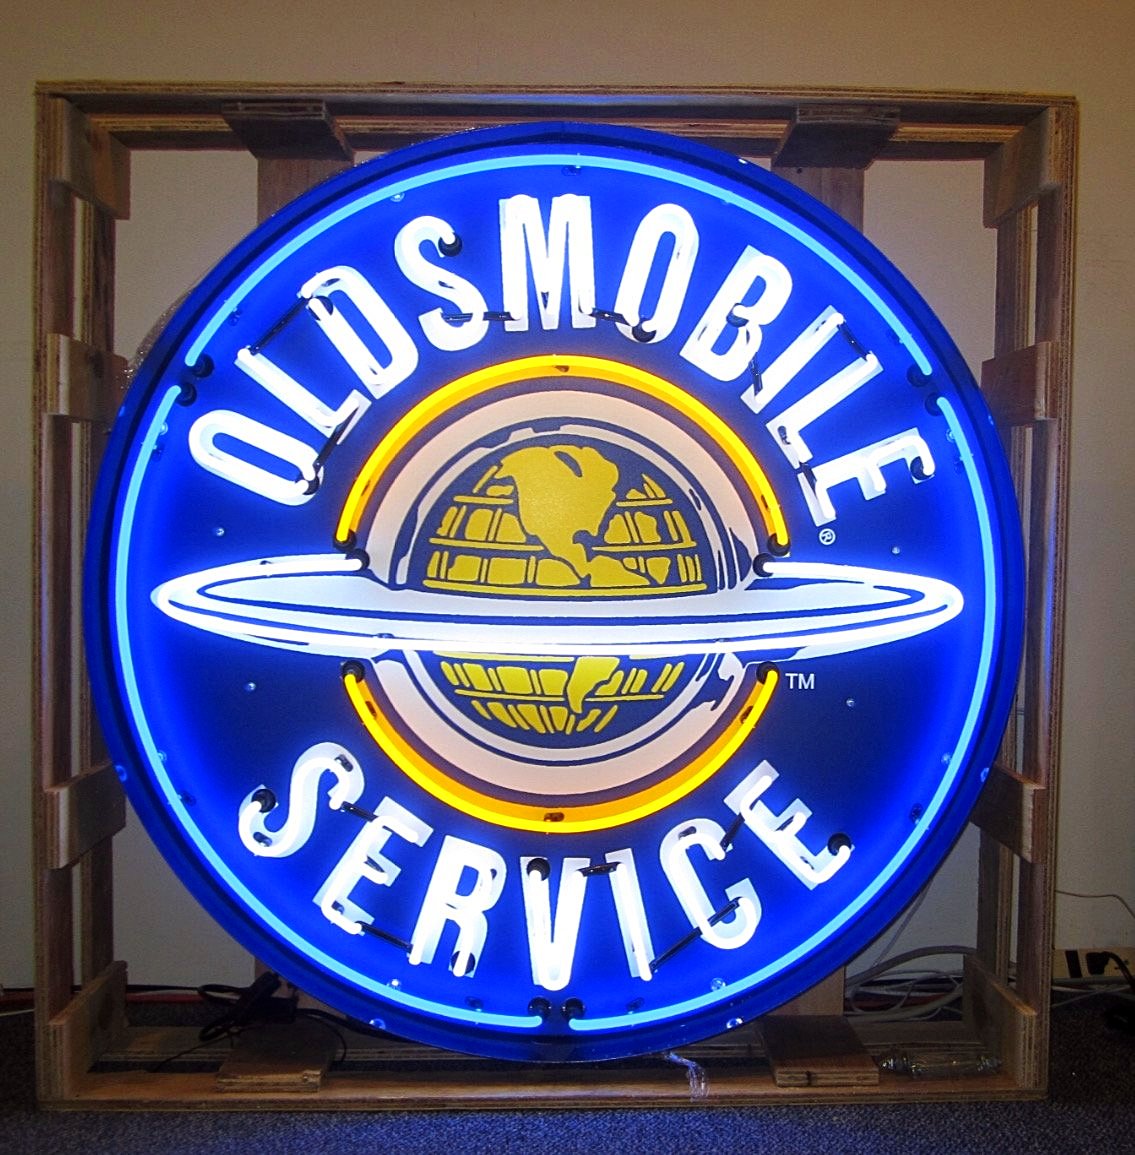 Oldsmobile Service in Steel Can Neon Sign